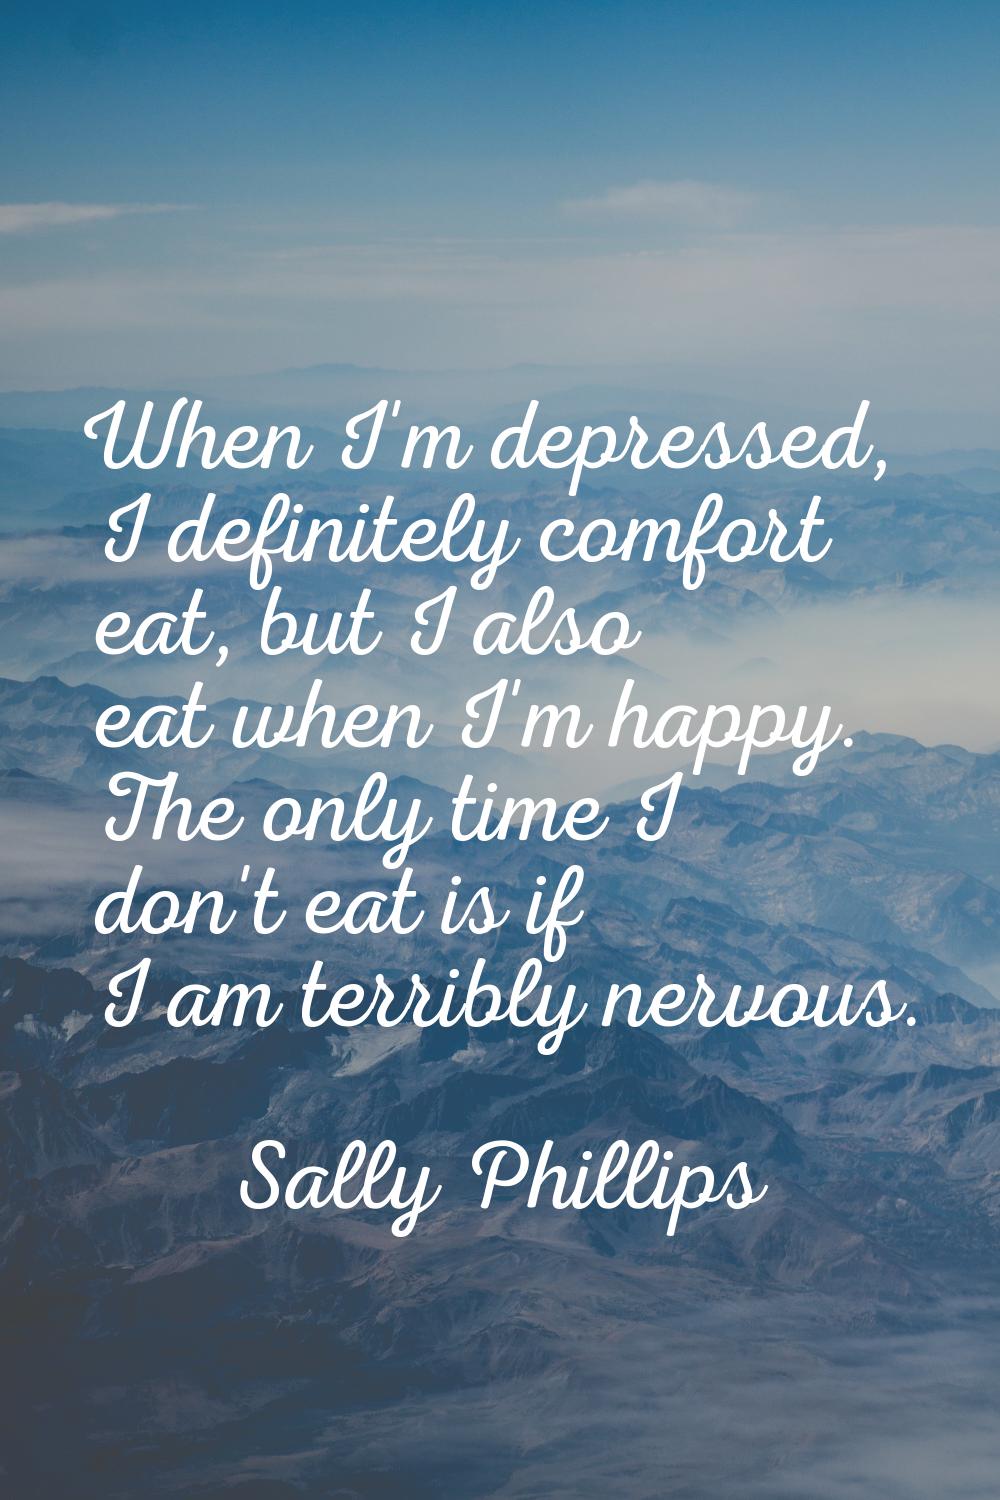 When I'm depressed, I definitely comfort eat, but I also eat when I'm happy. The only time I don't 